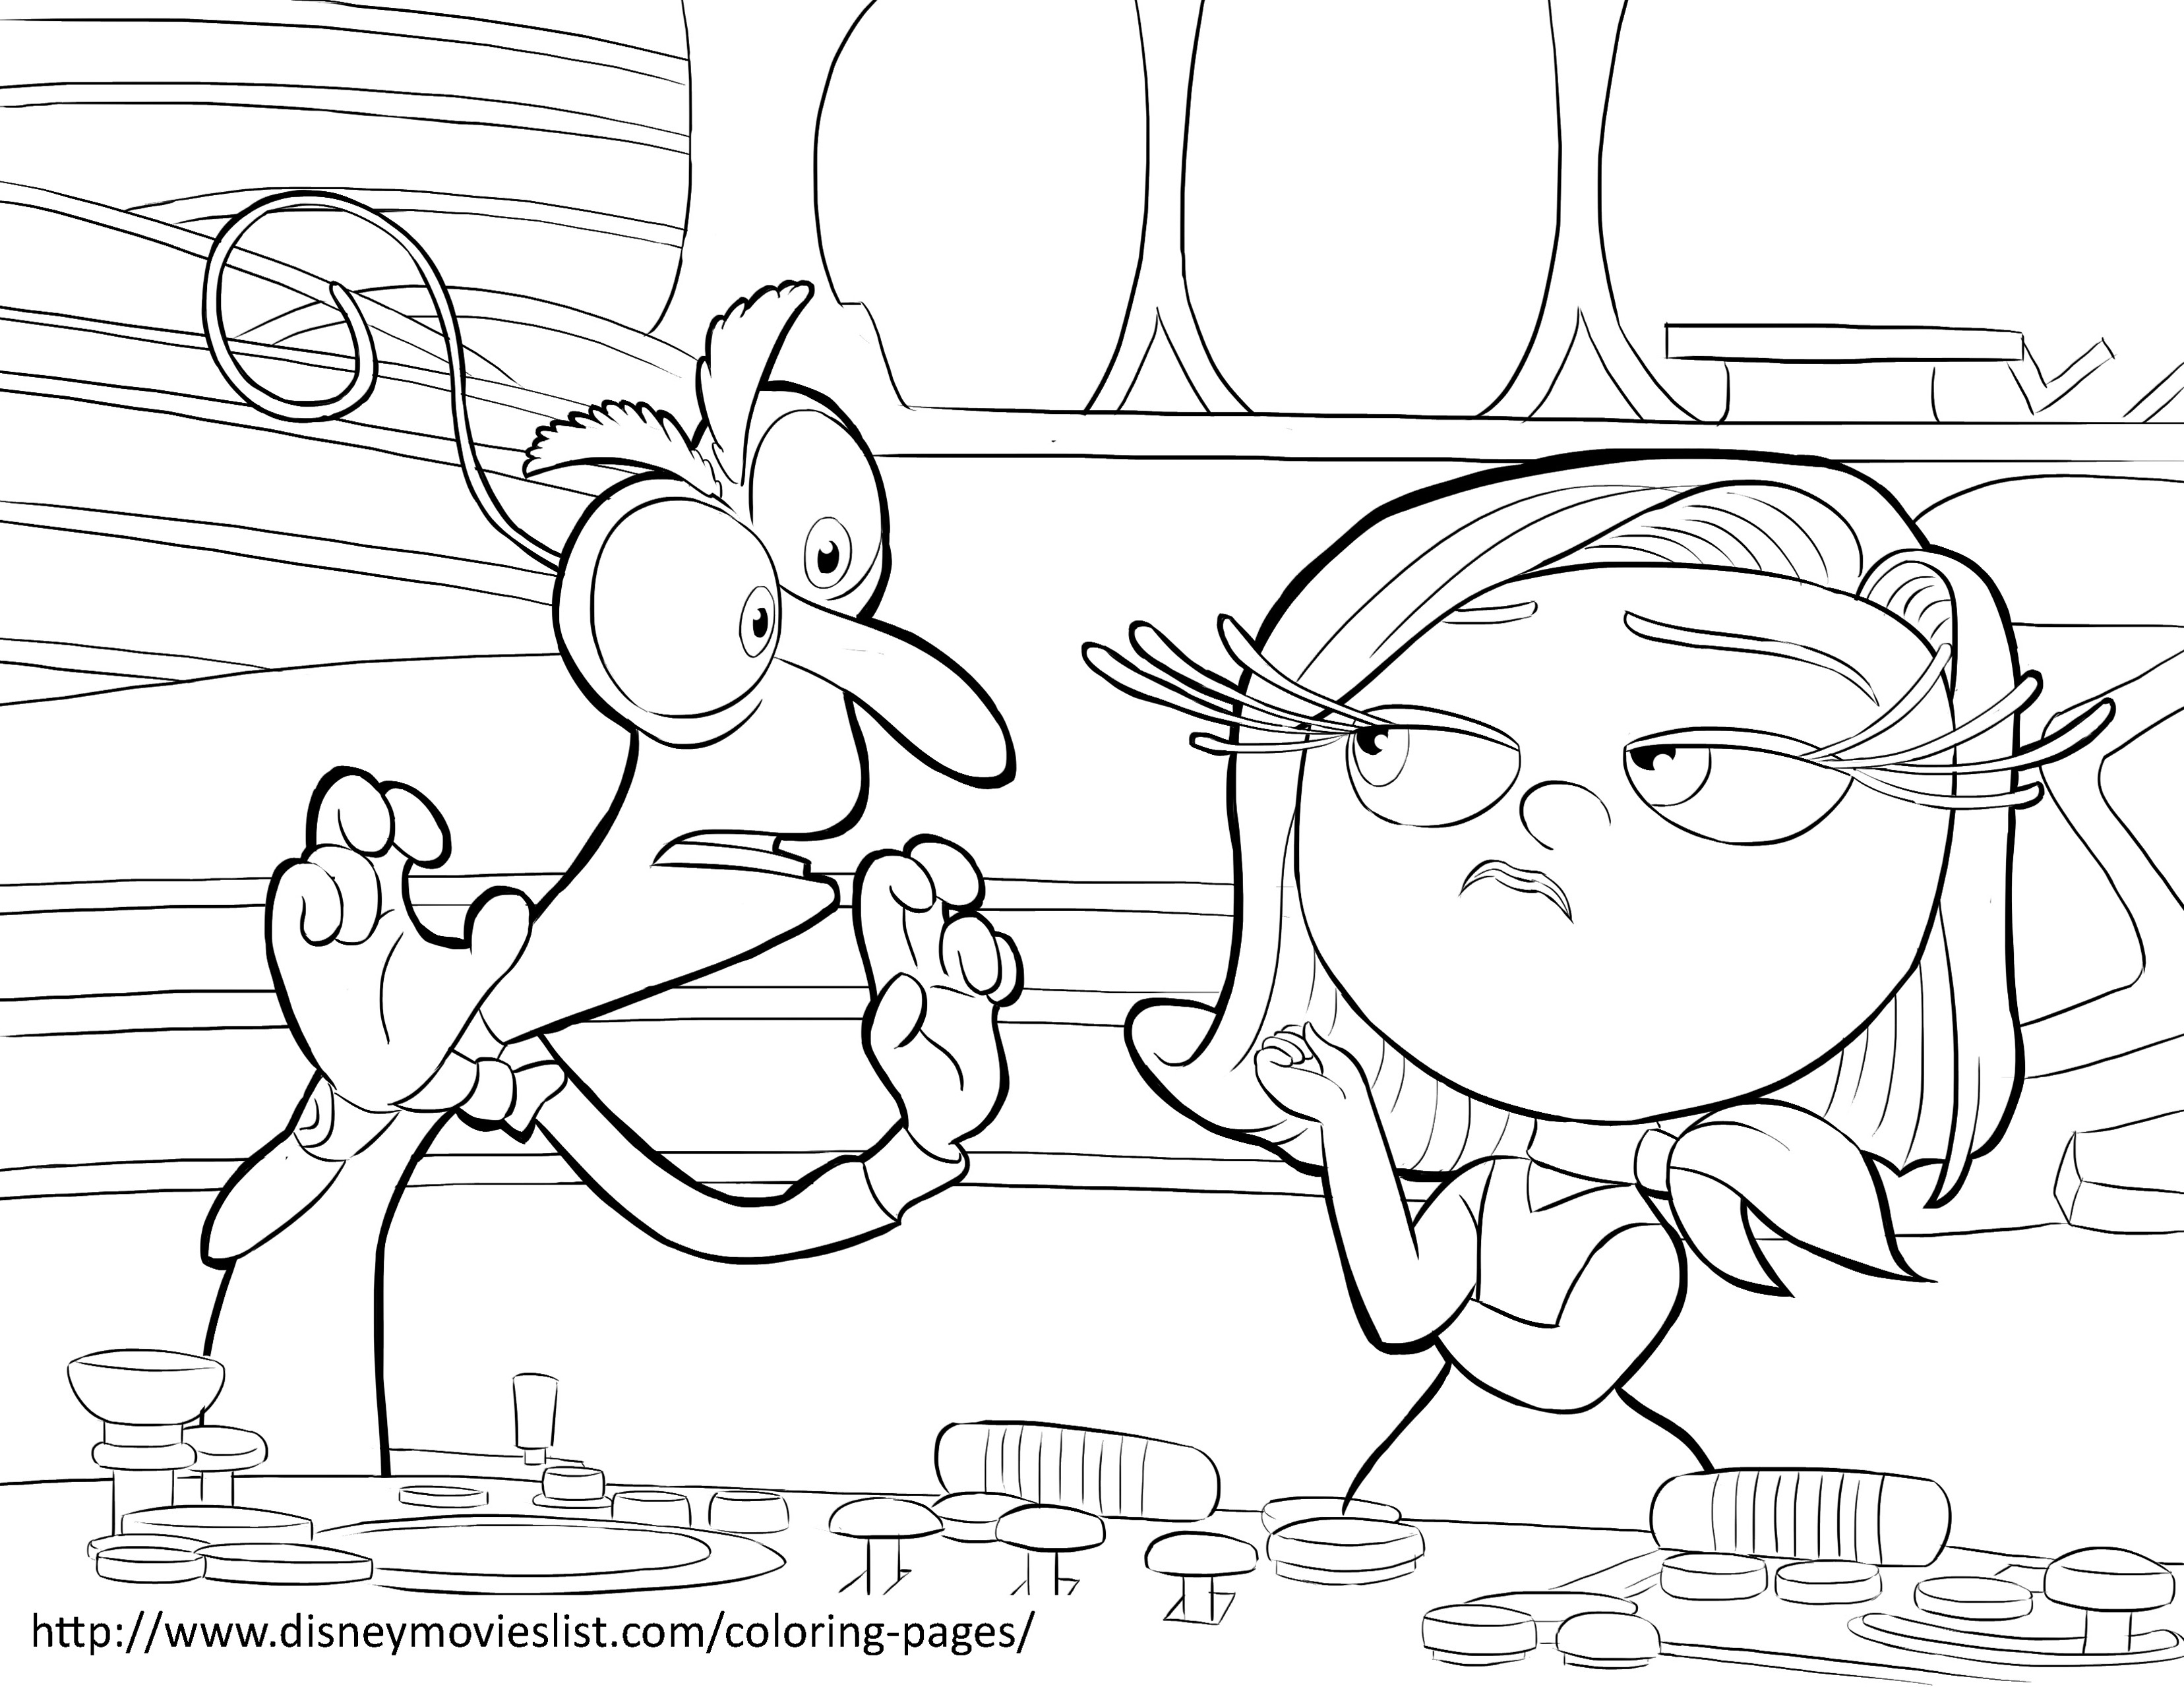 Vice versa : Fear - Inside Out Kids Coloring Pages